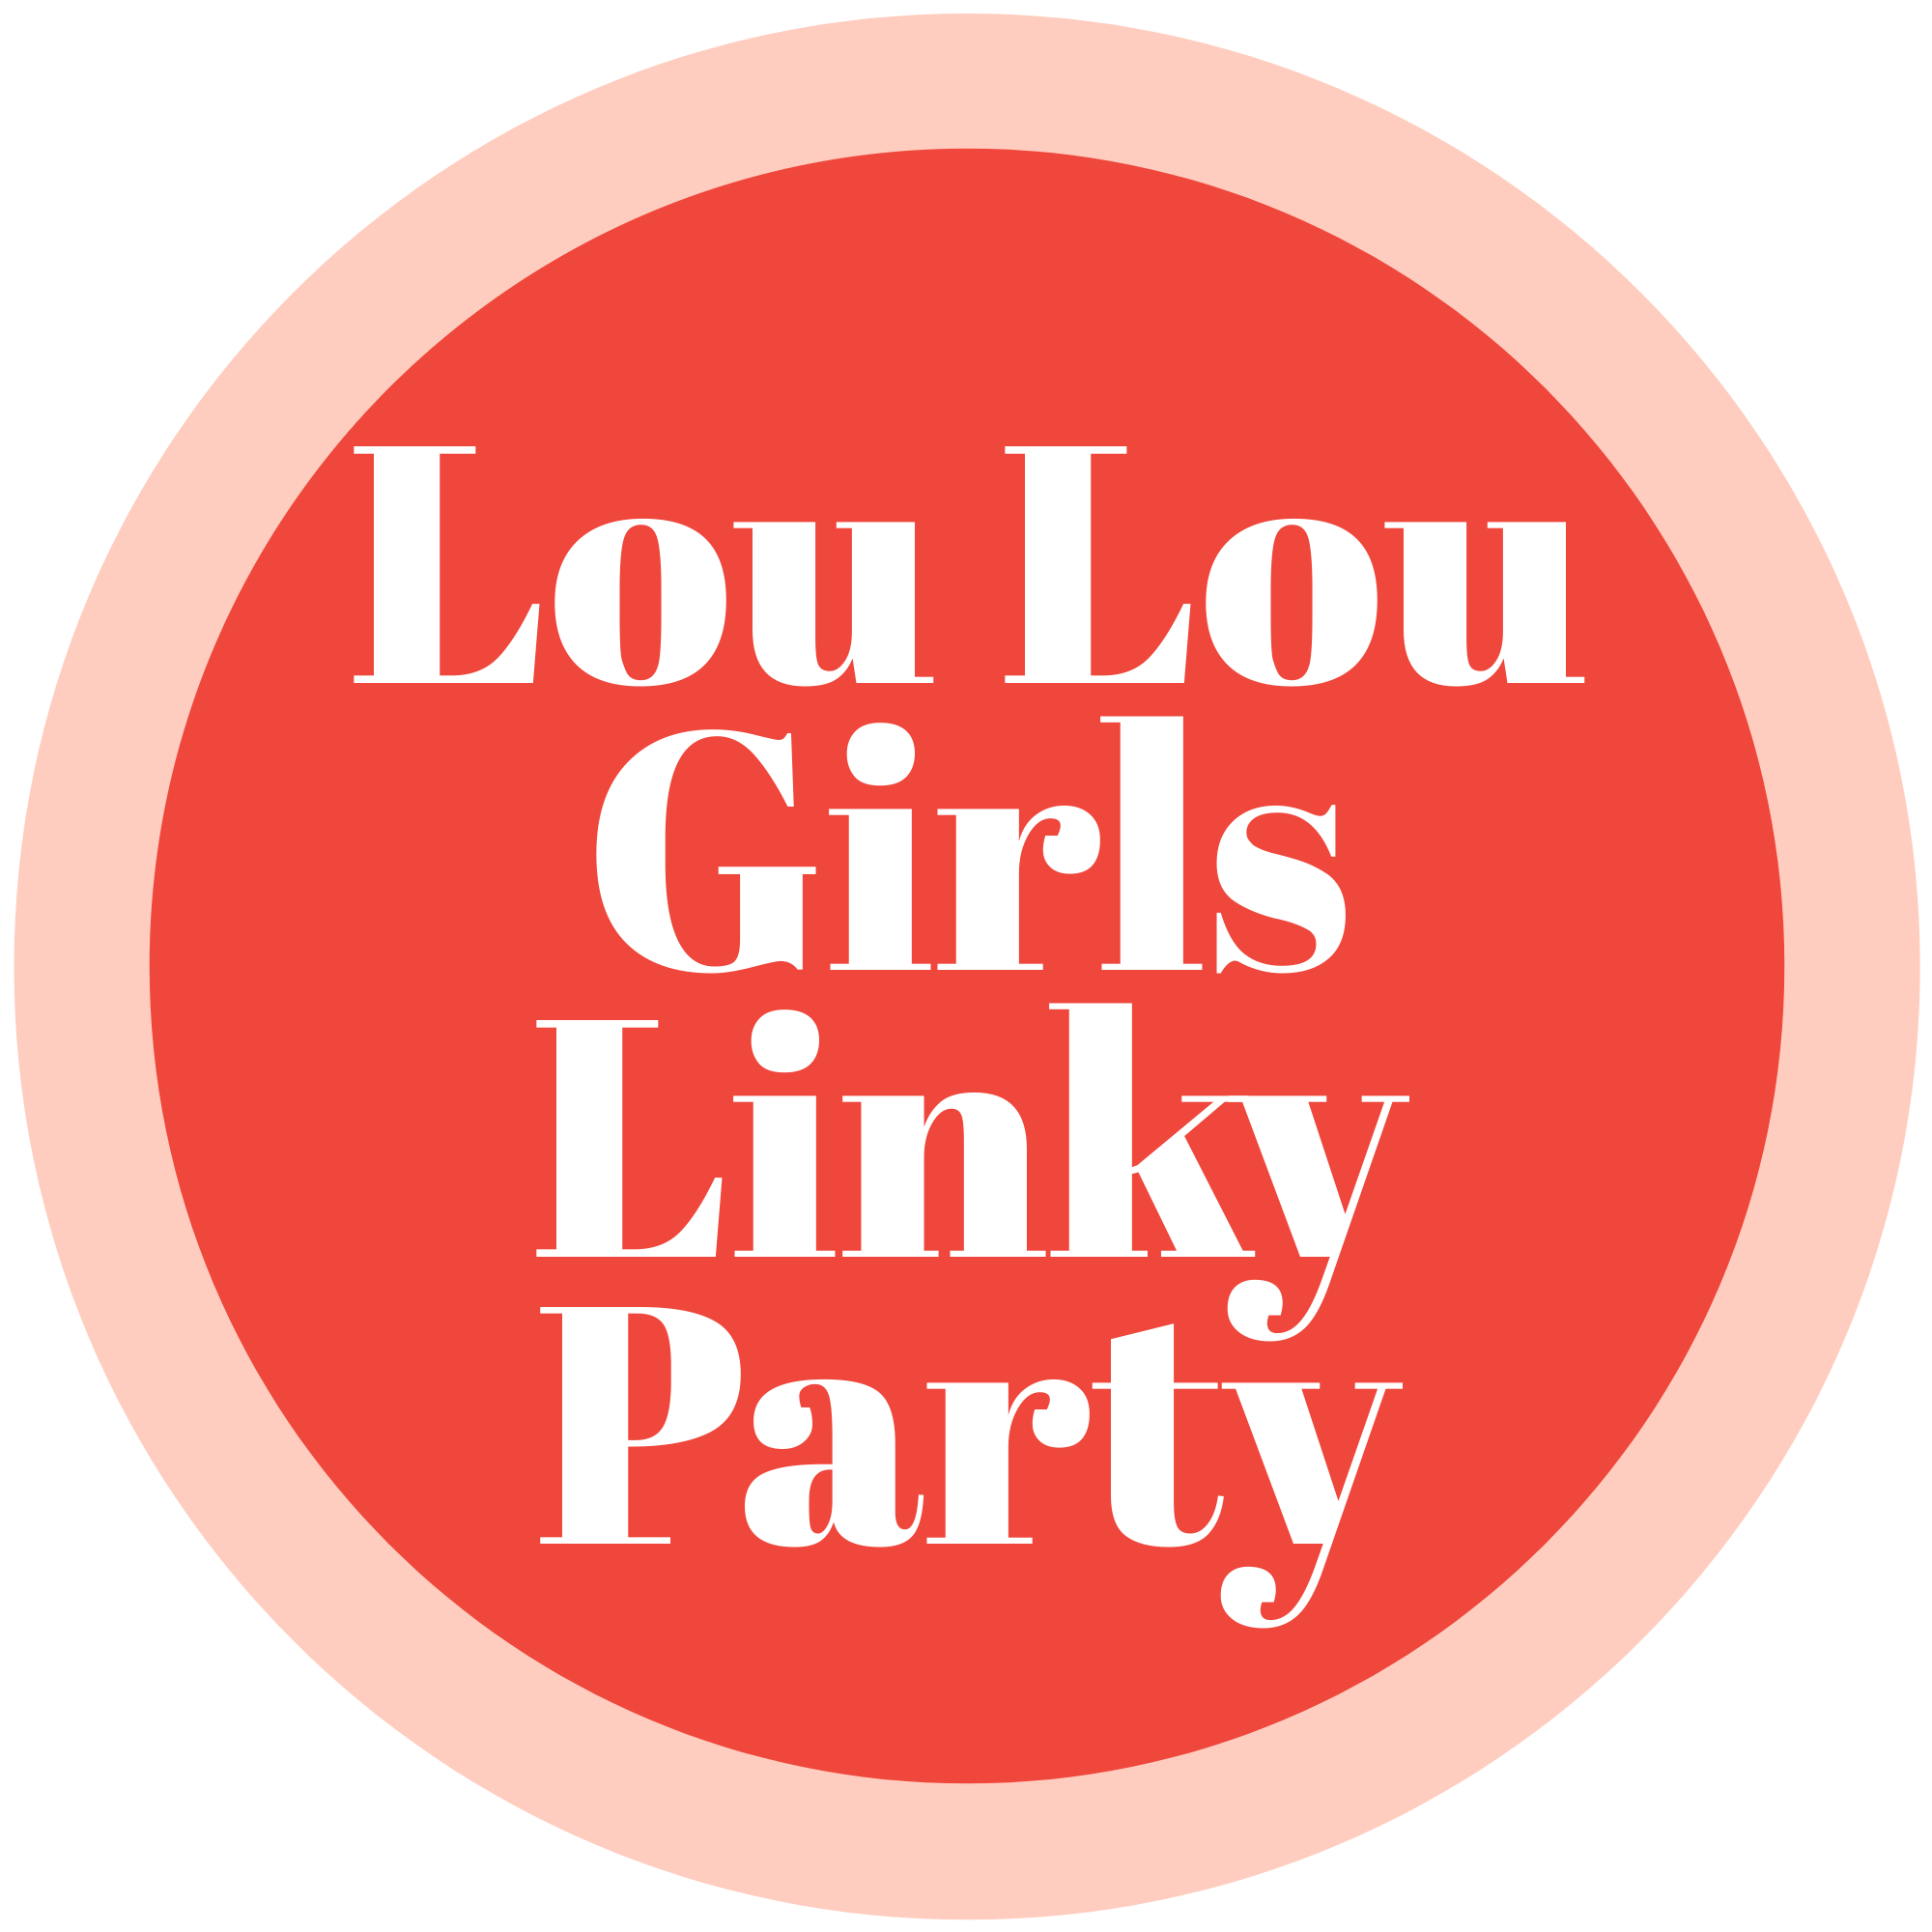 Lou Lou Girls Fabulous Party 495 #linkyparty #bloghop #linkyparties